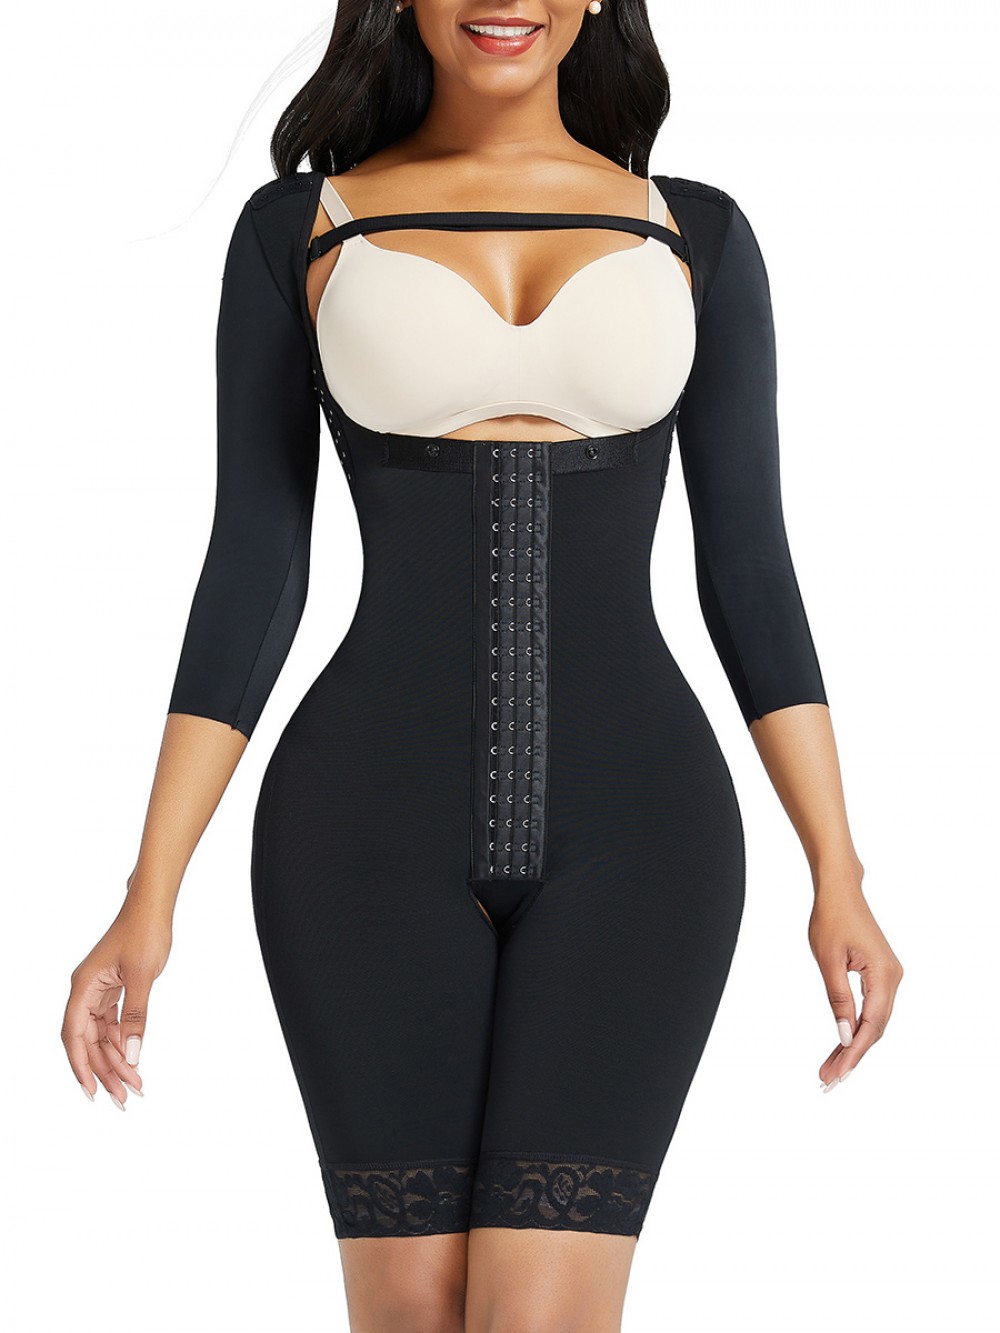 Black Lace Trim Hourglass Body Shaper With Sleeves Curve Shaper